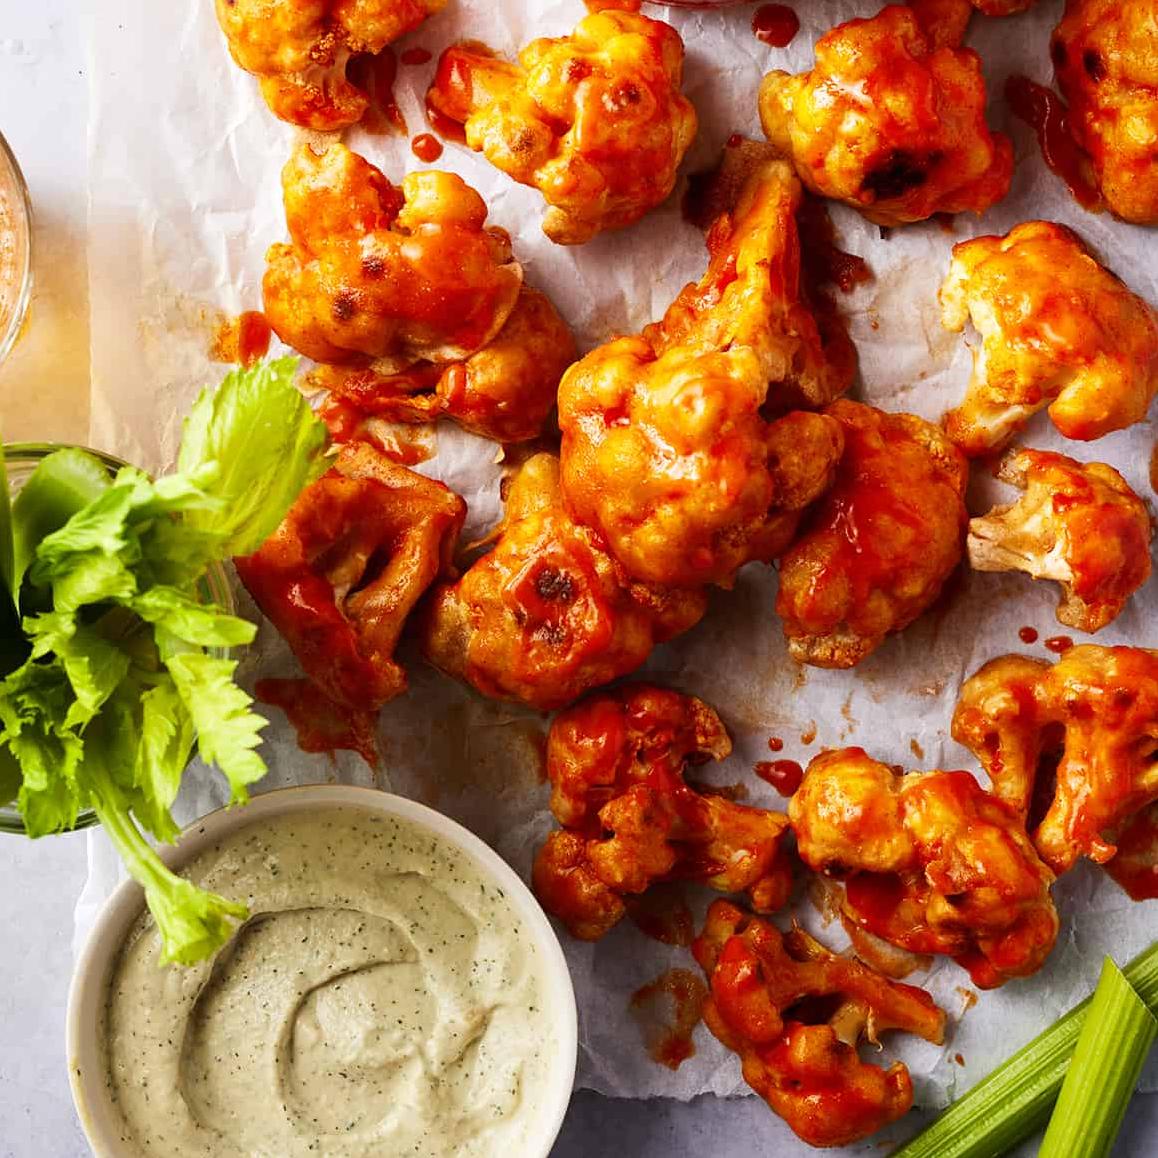  No need to miss out on the Buffalo wing fun—this vegetarian version has all the flavor without the meat.